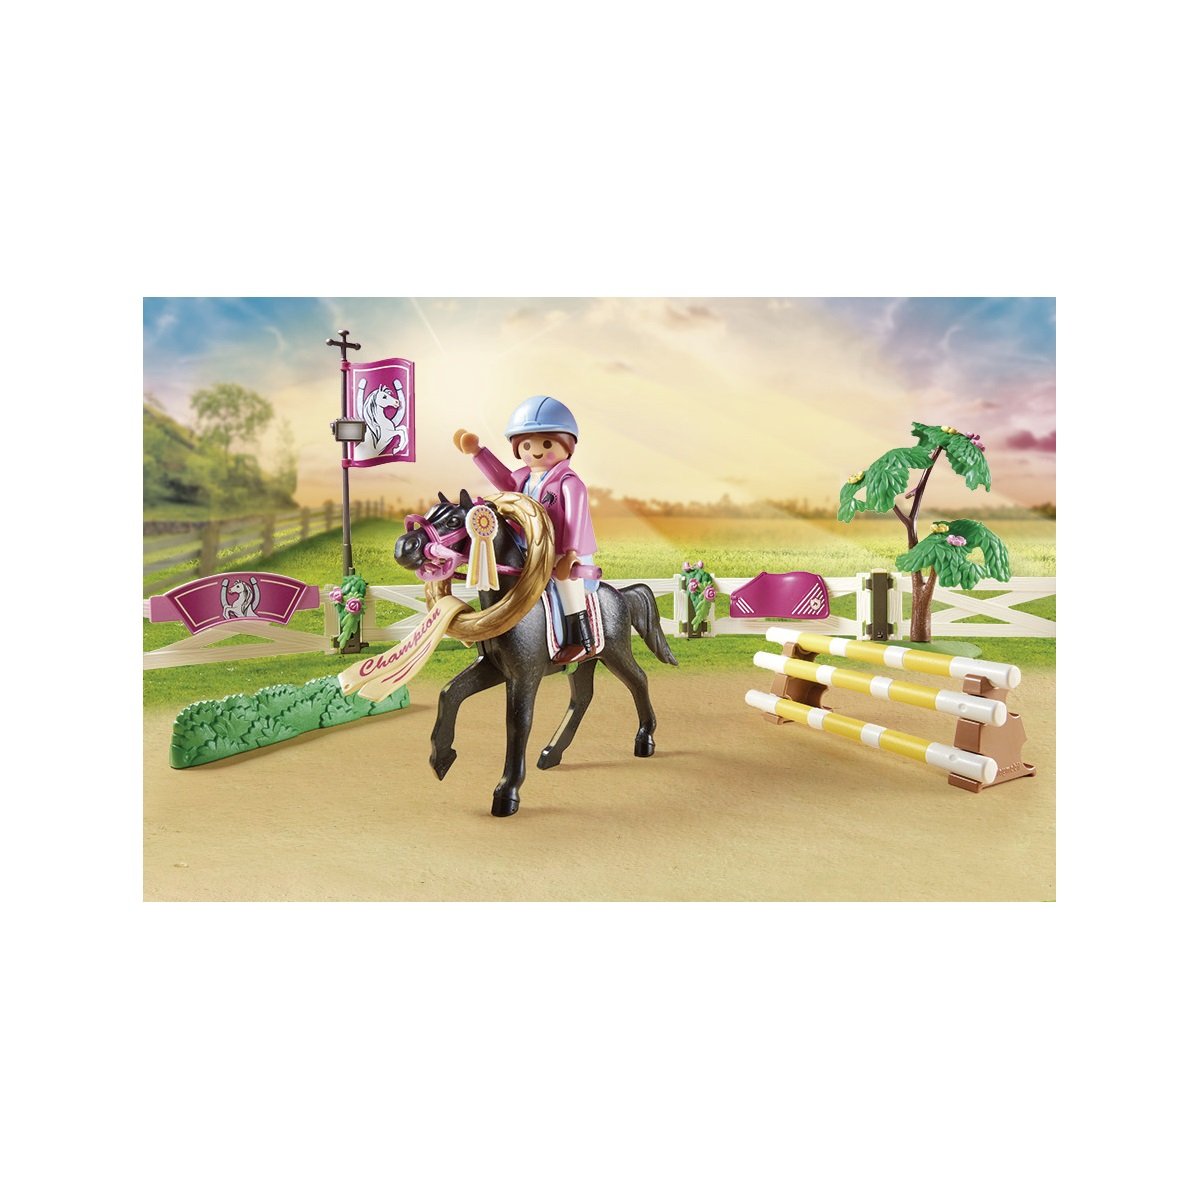 PLAYMOBIL COUNTRY - PARCOURS D'OBSTACLES AVEC CHEVAUX #70996 - PLAYMOBIL /  Country